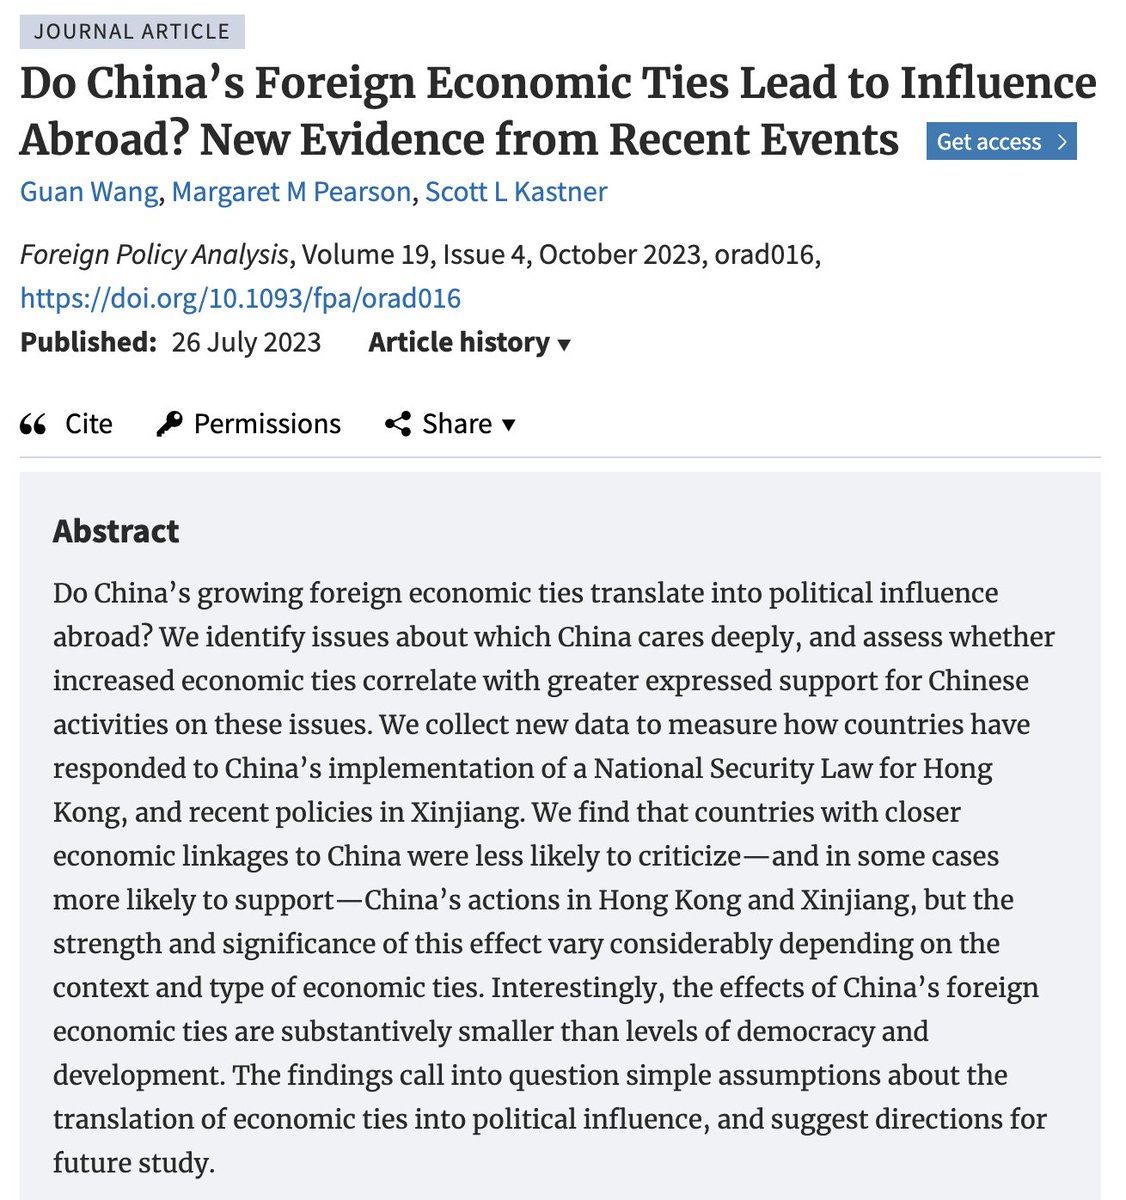 How do economics tie countries to China🇨🇳? @Guan_Wang921 , Margaret Pearson, & Scott Kastner measure countries responses to policy changes in Hong Kong and Xinjiang. Their findings question assumptions on the influence of economic ties #China academic.oup.com/fpa/article-ab…